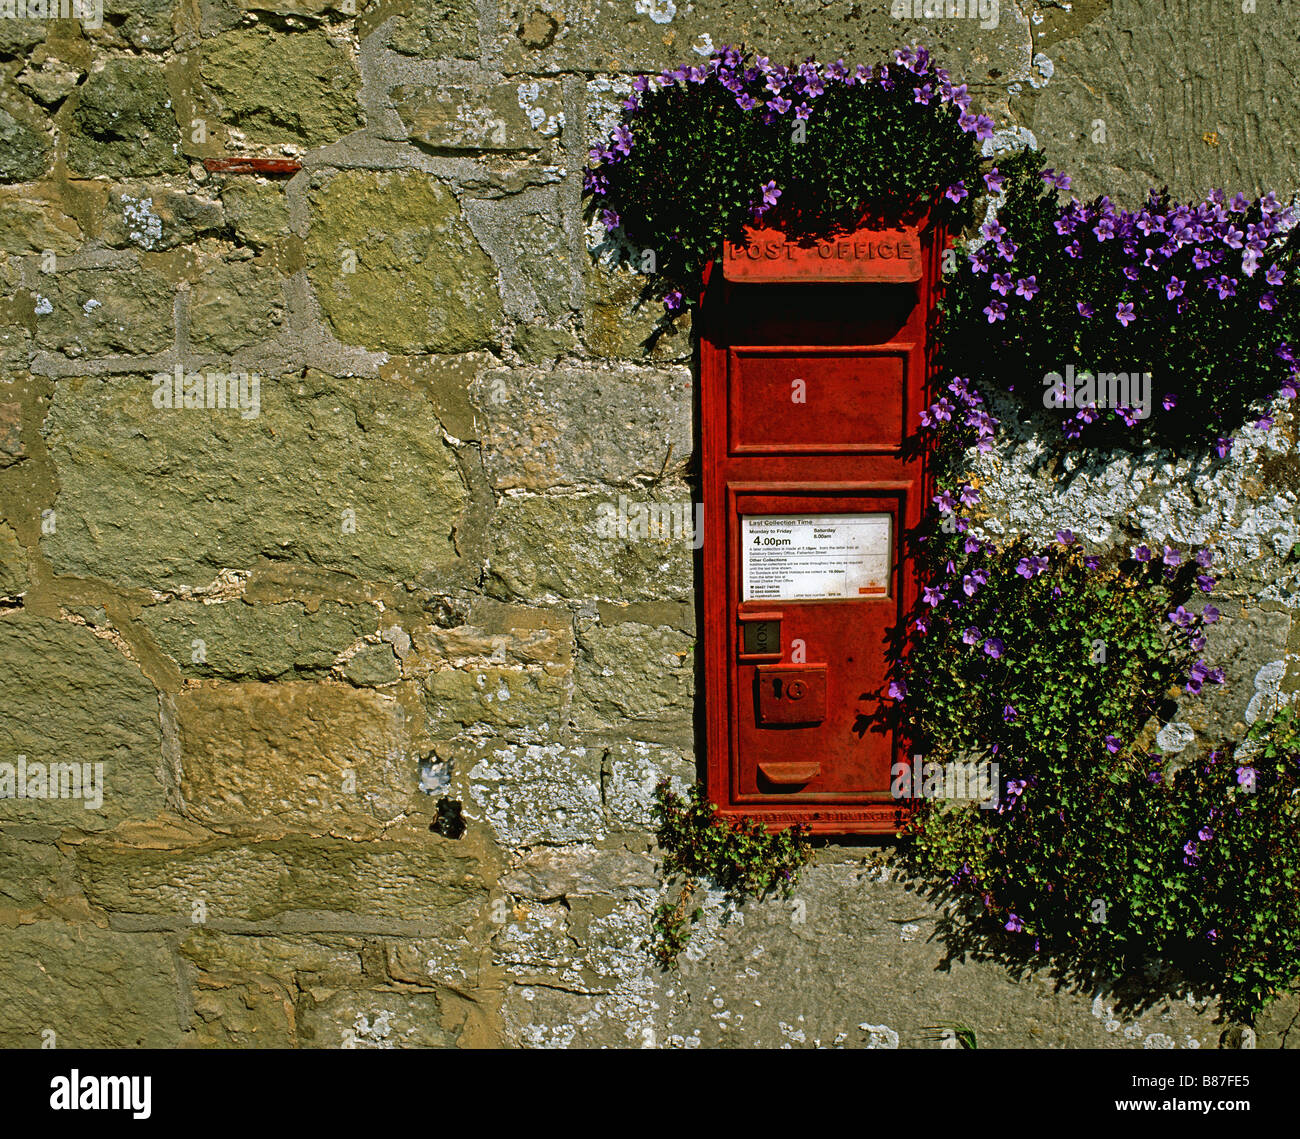 A post box in a old stone wall with flowers growing around it Stock Photo